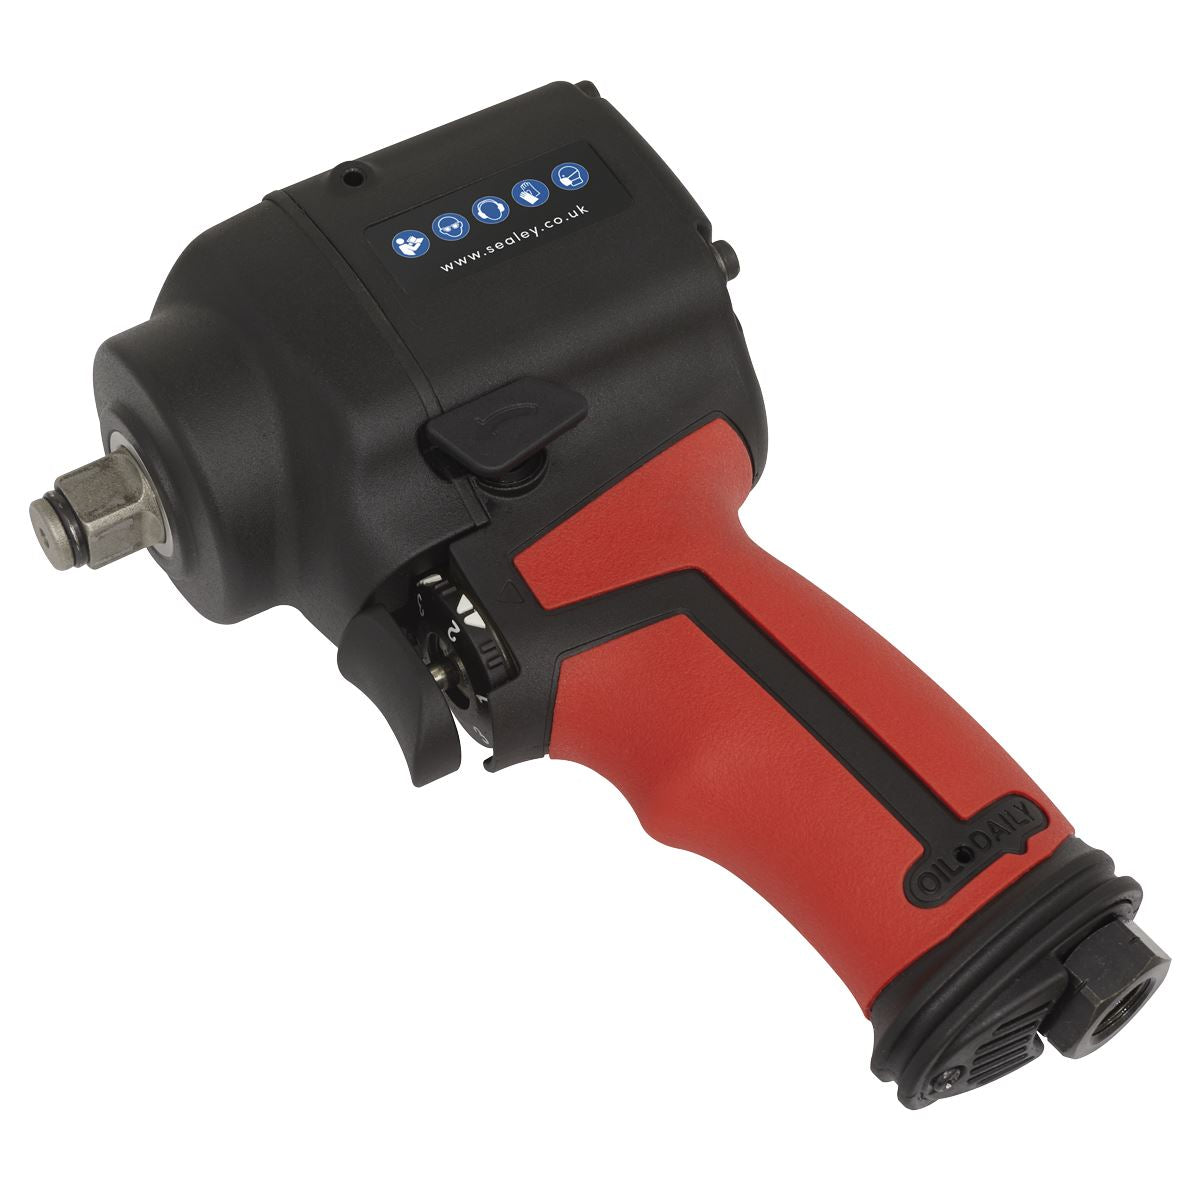 Sealey Premier Air Impact Wrench 1/2"Sq Drive Stubby - Twin Hammer